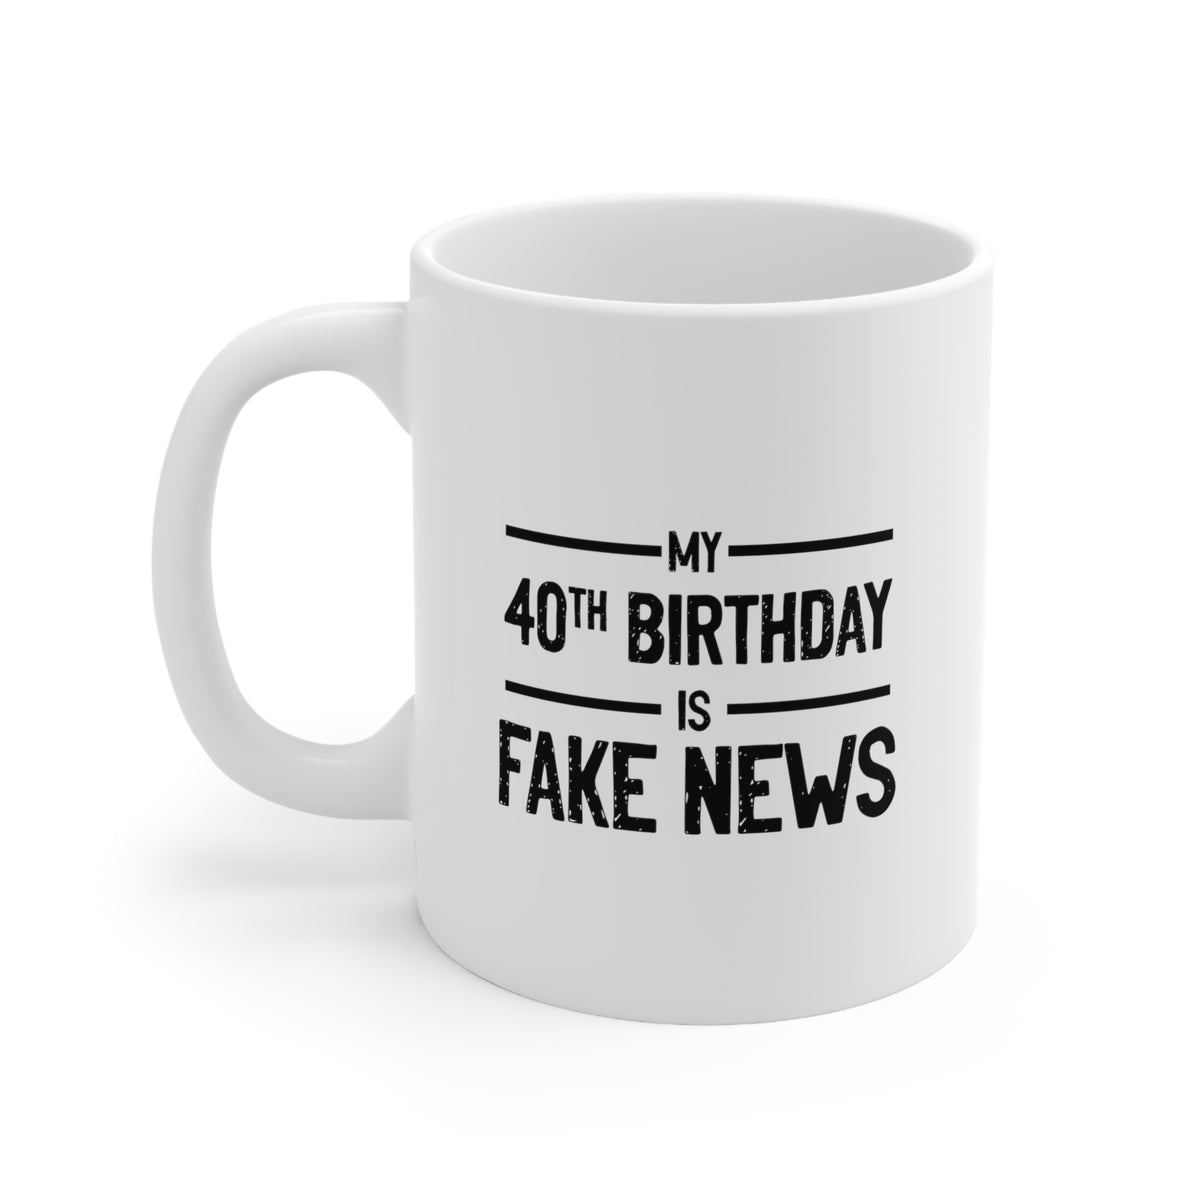 40th Funny Birthday Mug, My 40th Birthday Is Fake News, Happy Birthday For 50 Years Old Dad Mom Brother Sister